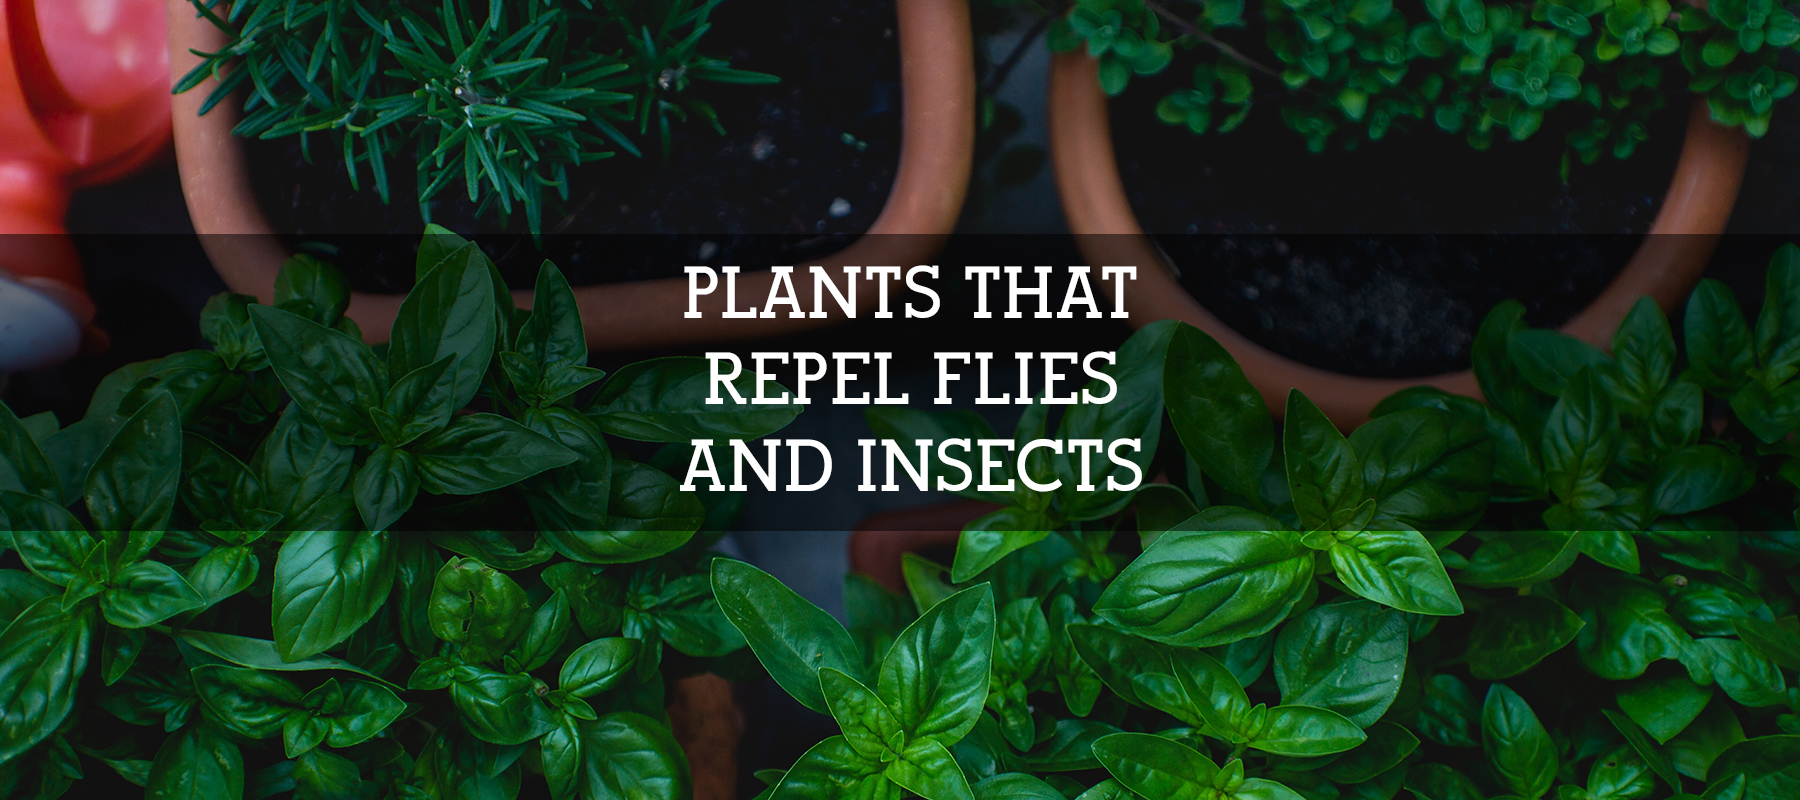 Plants that Repel Flies and Insects